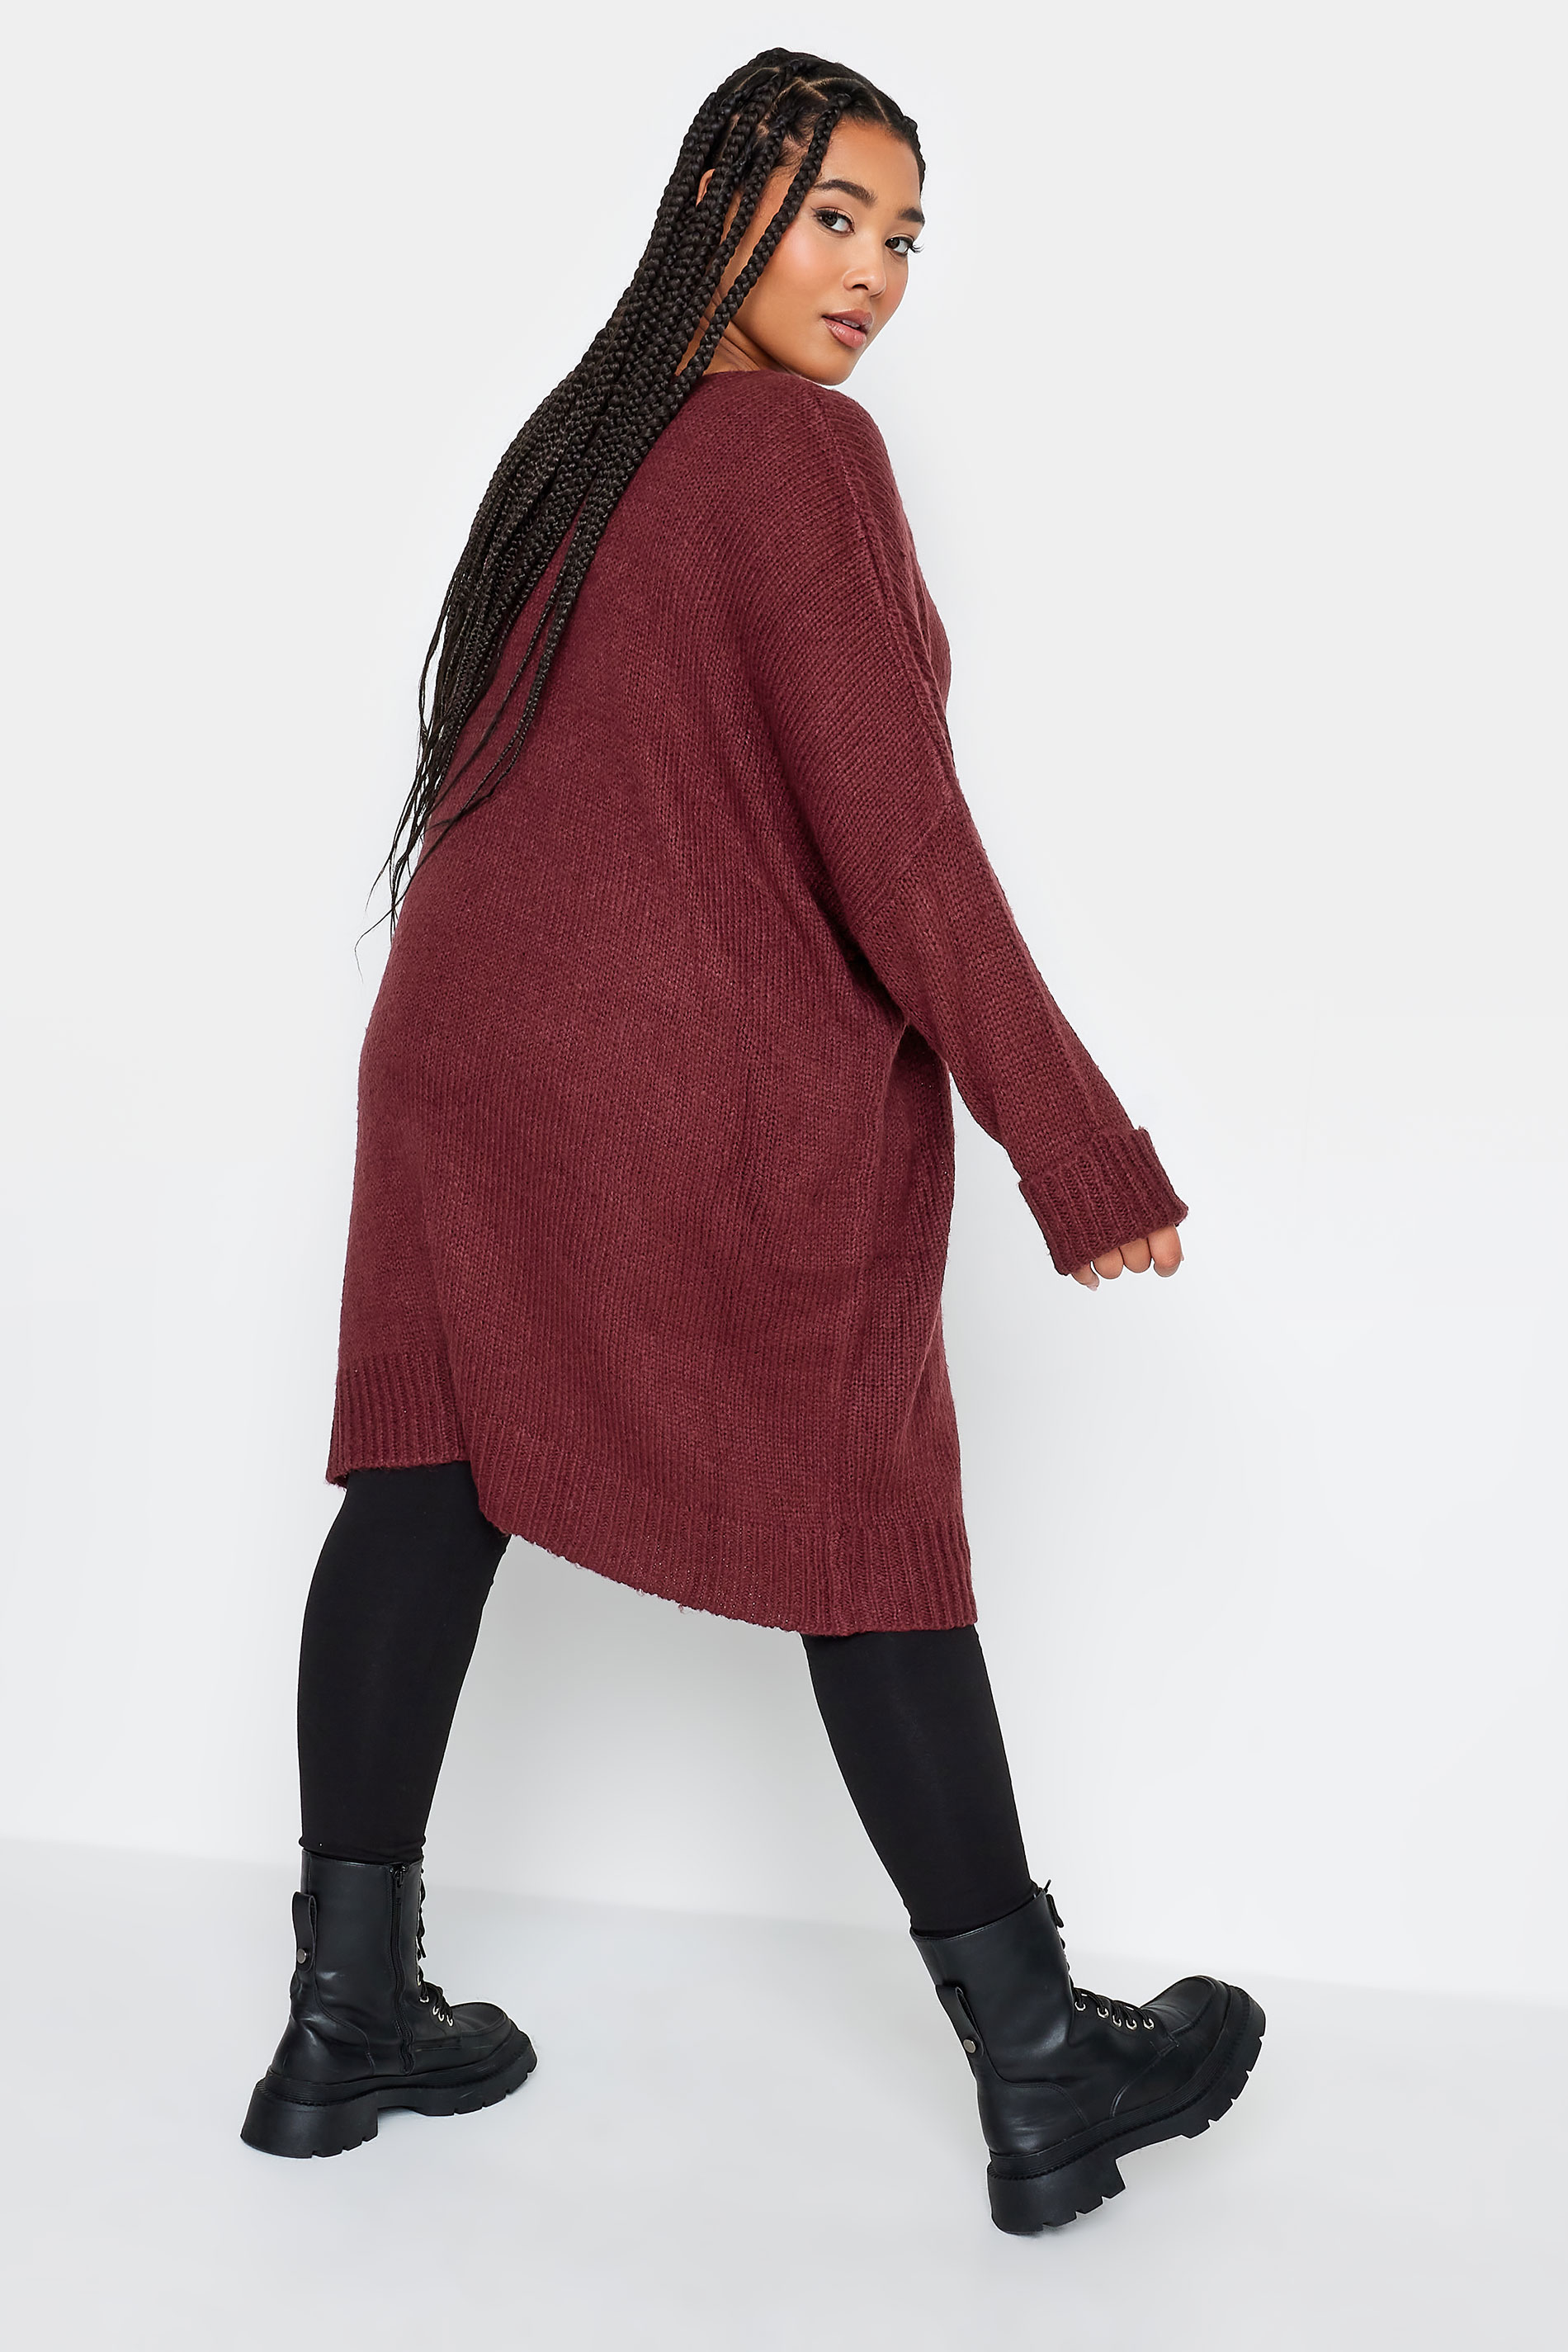 YOURS Plus Size Burgundy Red Midi Knitted Jumper Dress | Yours Clothing 3